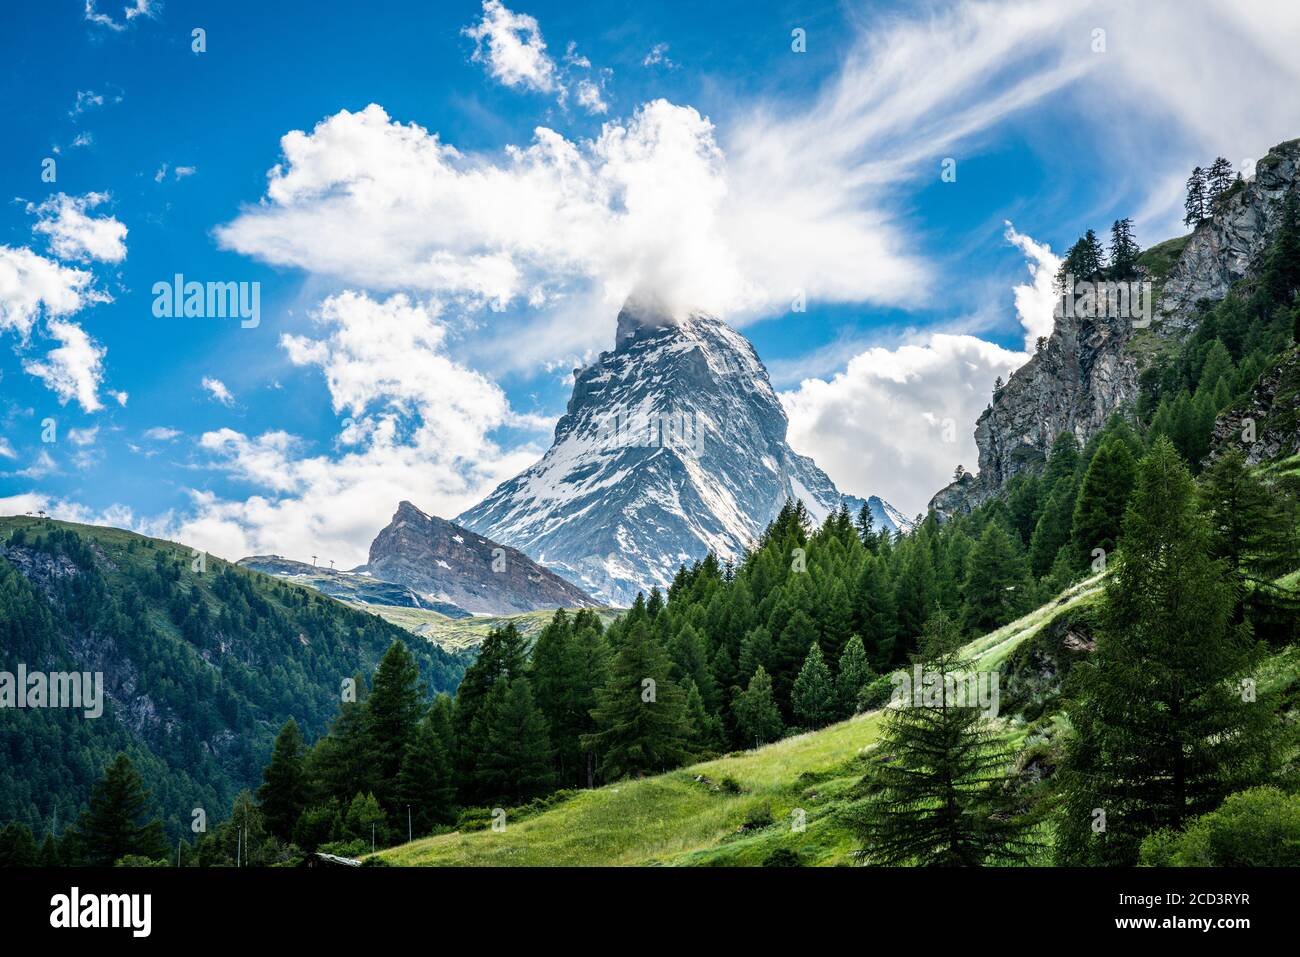 Scenic view of the Matterhorn mountain summit with snow clouds blue sky and green nature during summer in Zermatt Switzerland Stock Photo